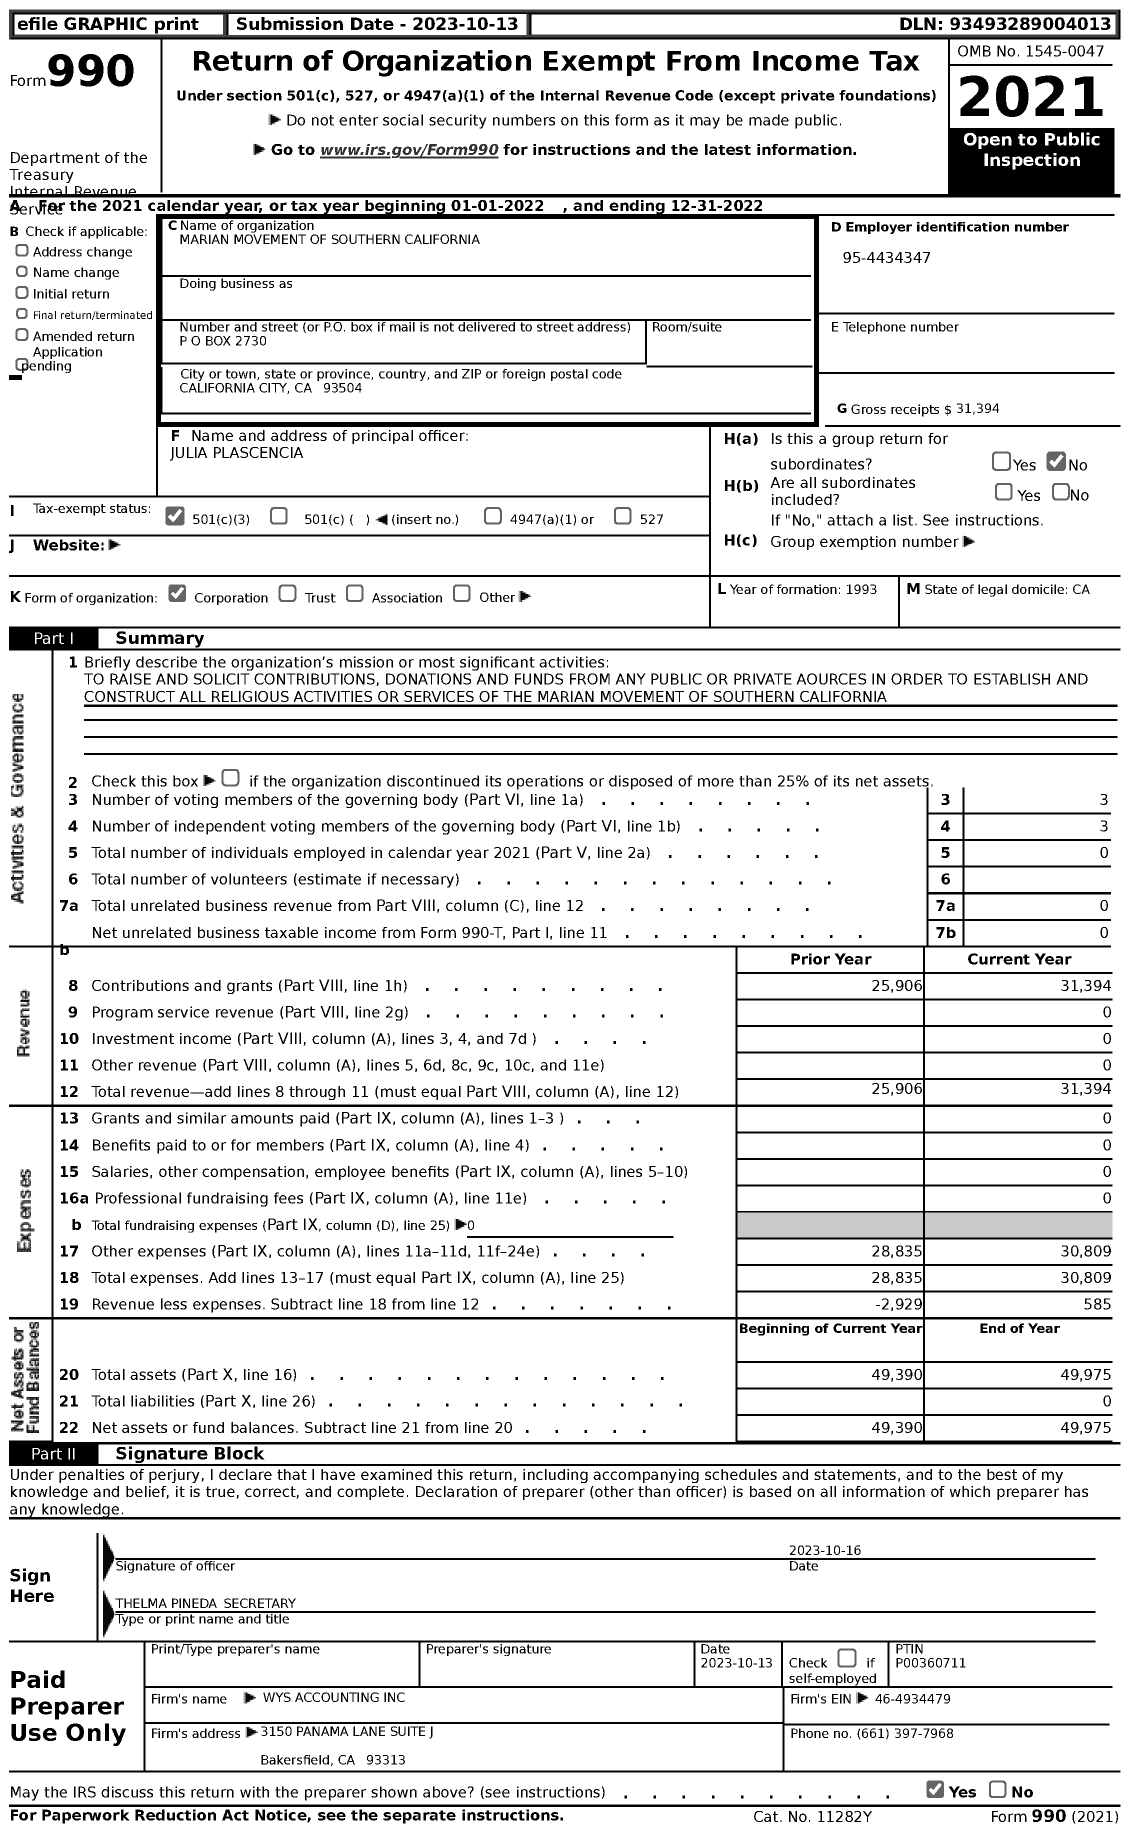 Image of first page of 2022 Form 990 for Marian Movement of Southern California